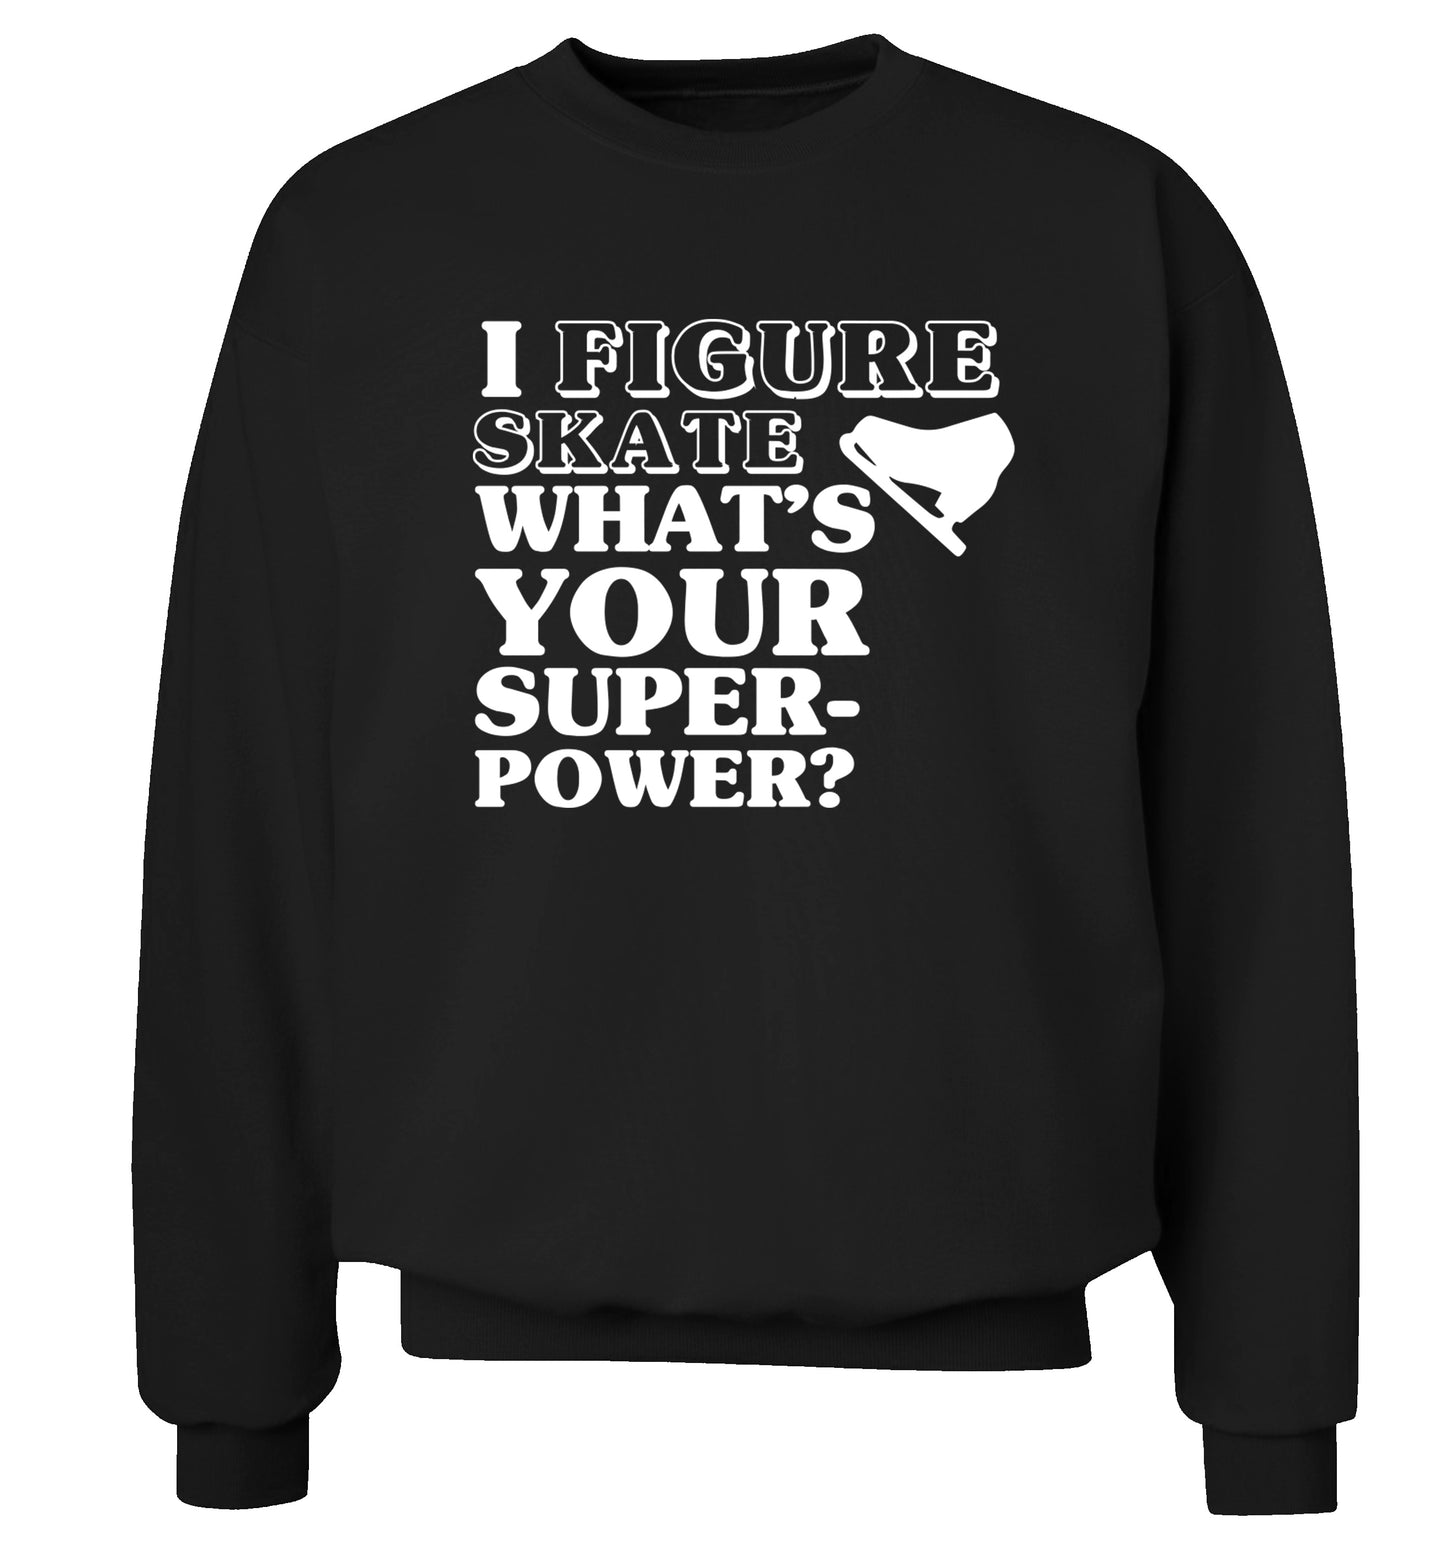 I figure skate what's your superpower? Adult's unisexblack Sweater 2XL